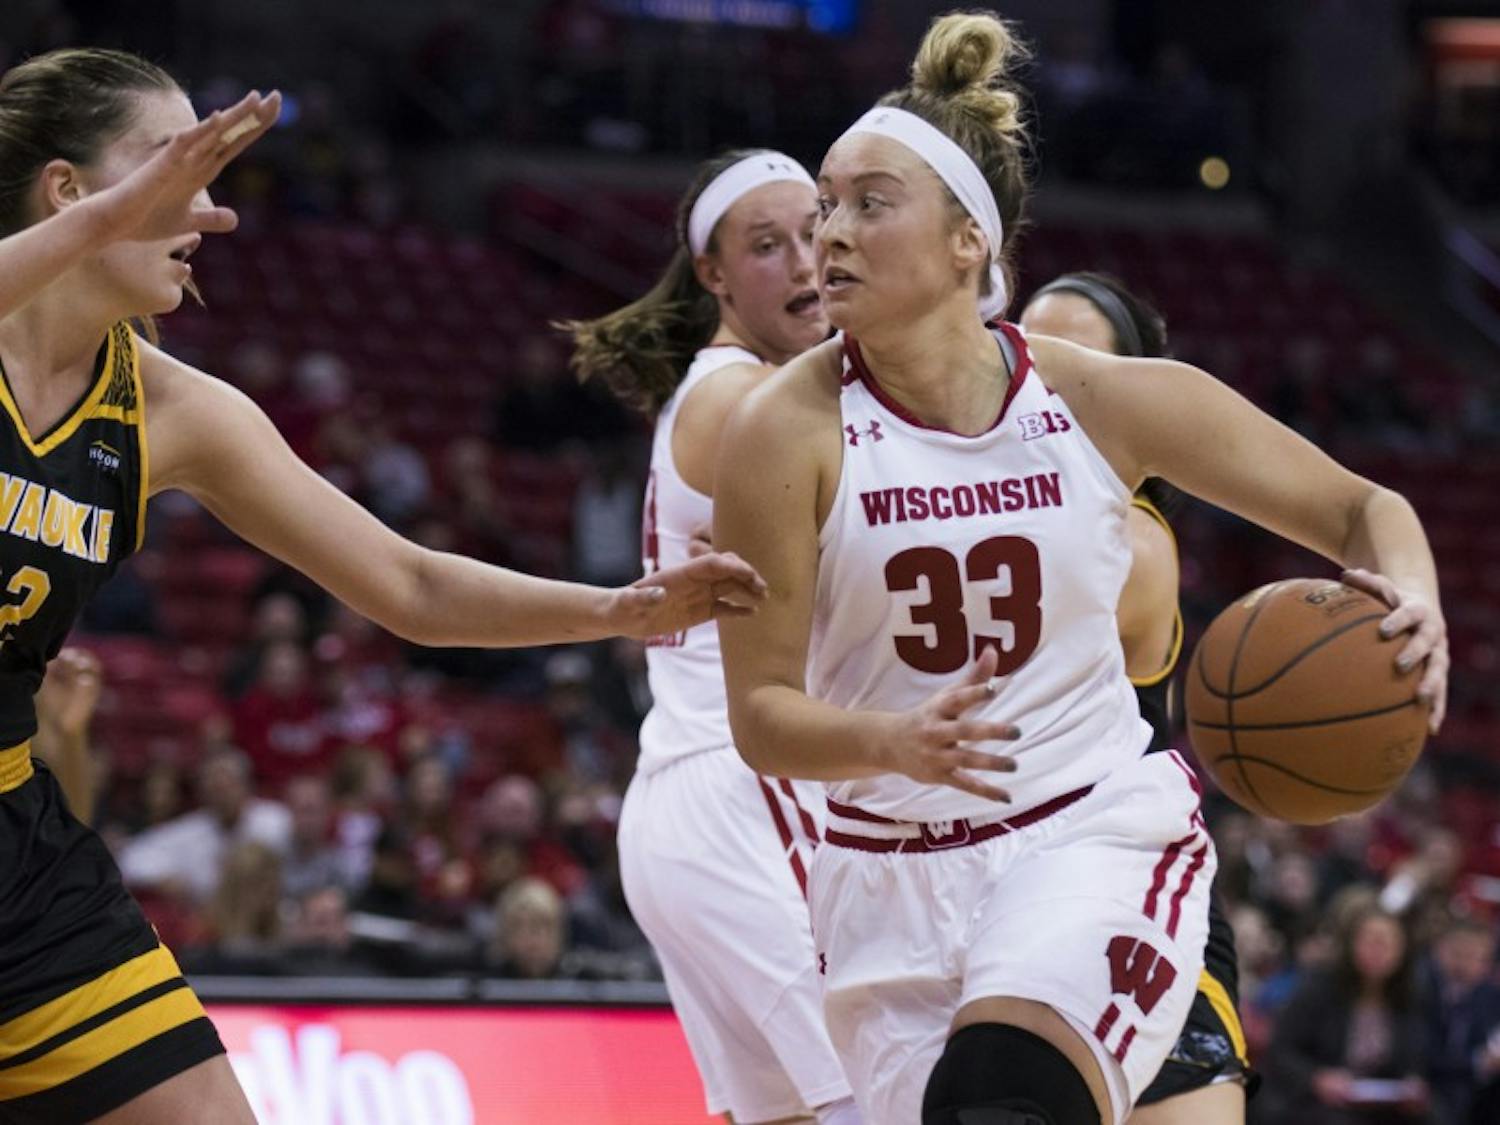 Courtney Fredrickson had a double-double last time out against Minnesota. As a team, though, UW is looking for better success Wednesday night.&nbsp;